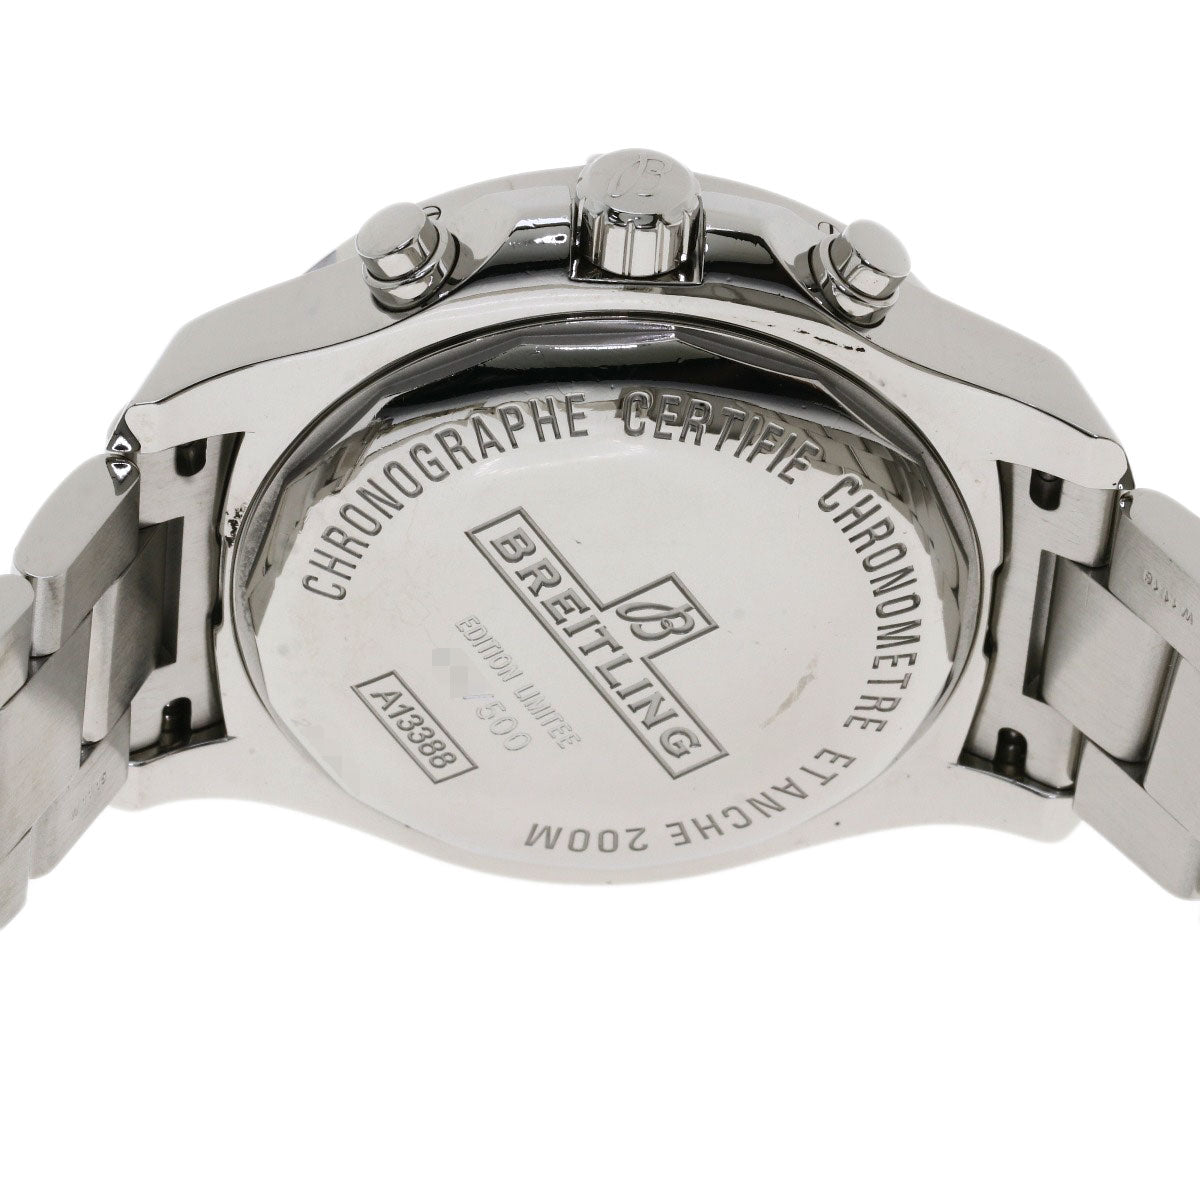 Breitling A13388 Colt Chronograph Japan Limited Stainless Steel Men&#39;s Watch - Japanese-Online-Store (JOS)